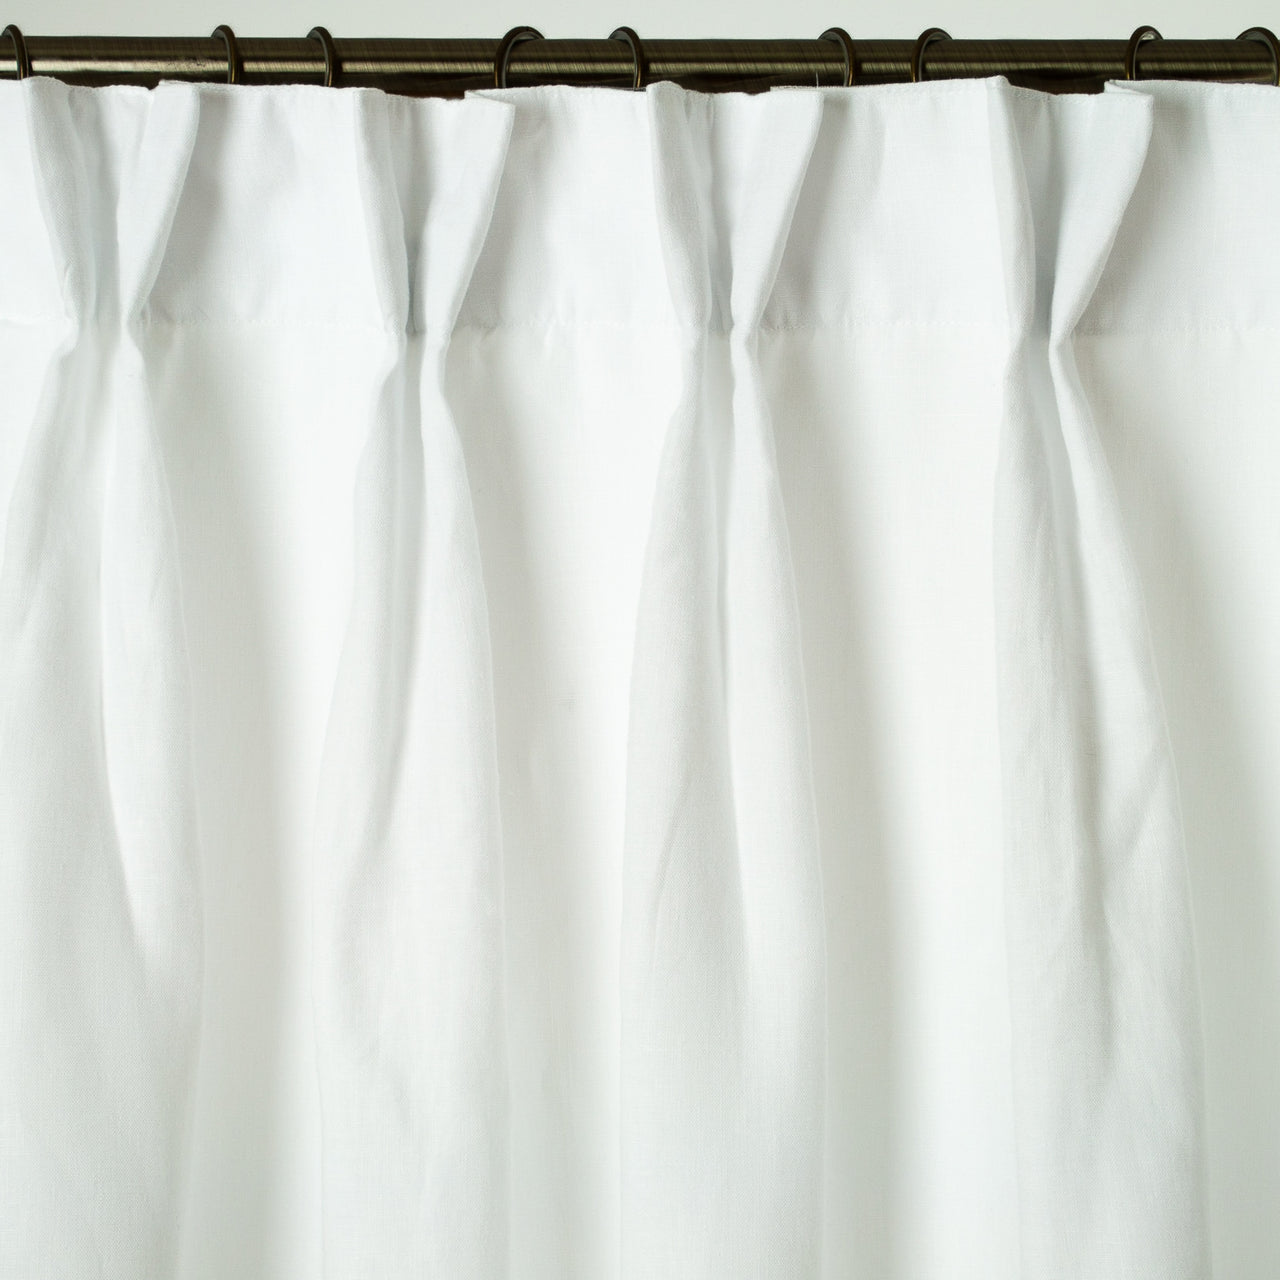 Dutch Pleat Linen Curtain Panel - Heading for Rings and Hooks